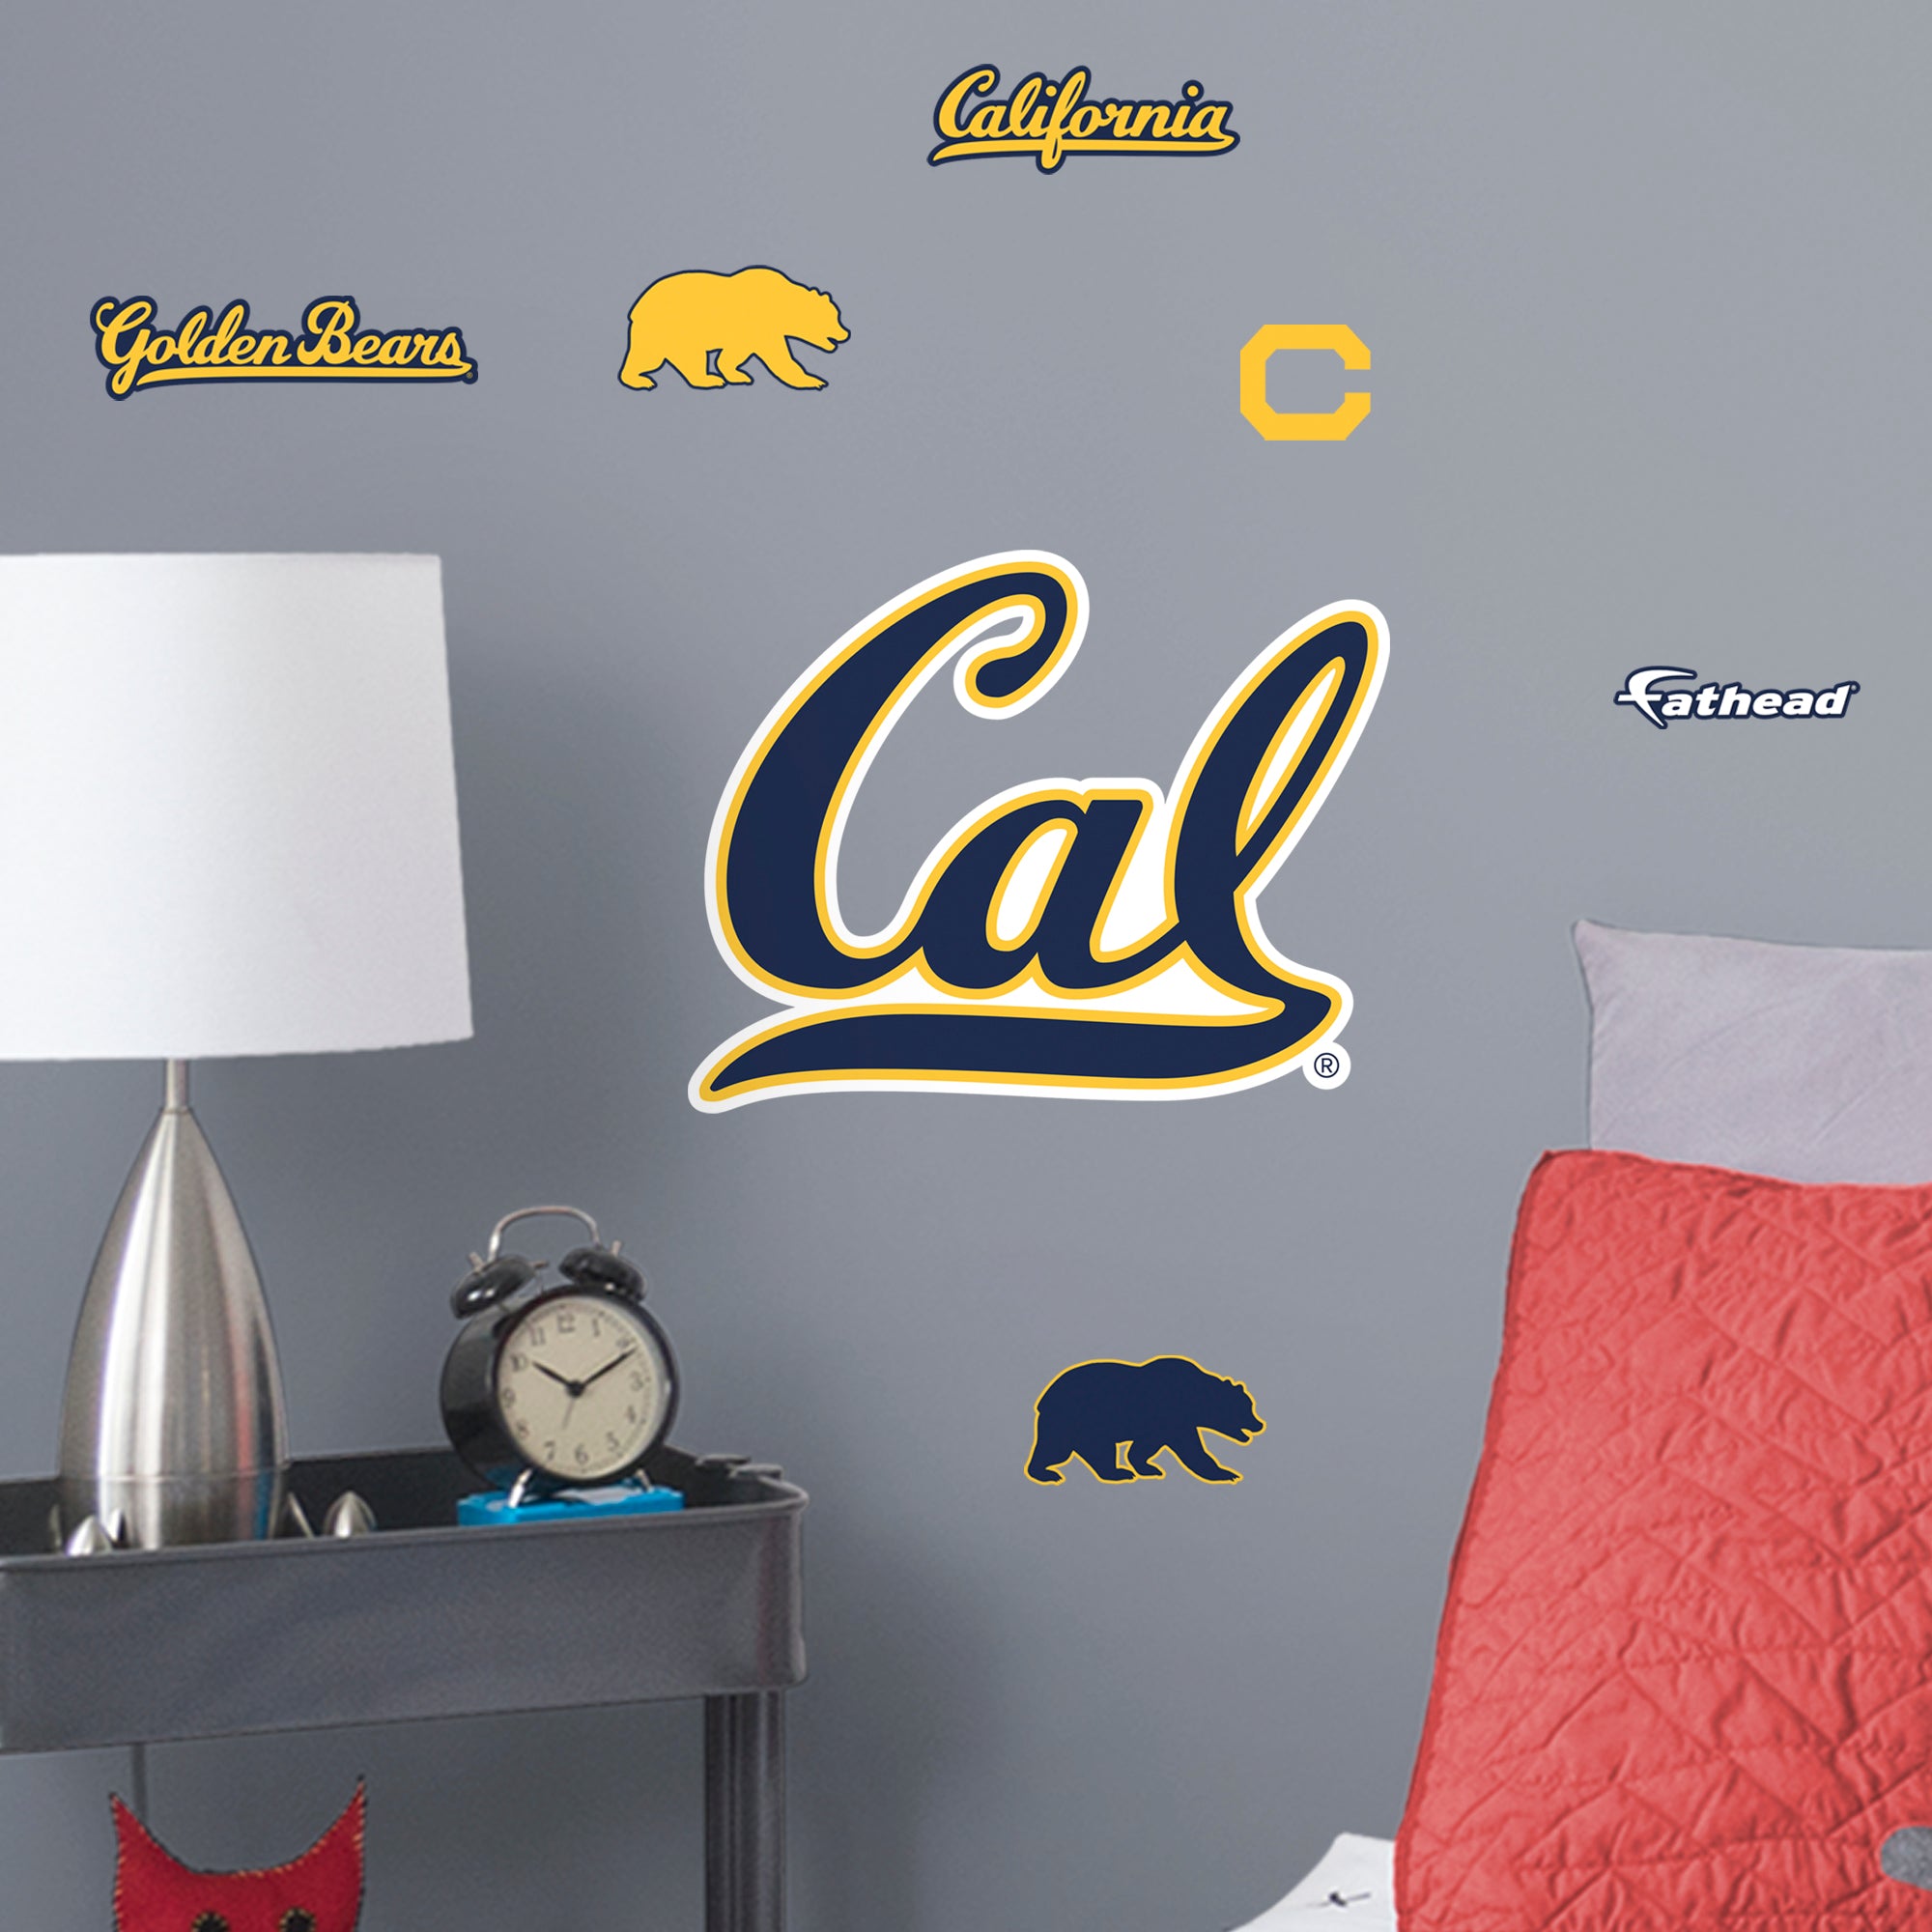 Cal Golden Bears 2020 POD Teammate Logo - Officially Licensed NCAA Removable Wall Decal Large by Fathead | Vinyl